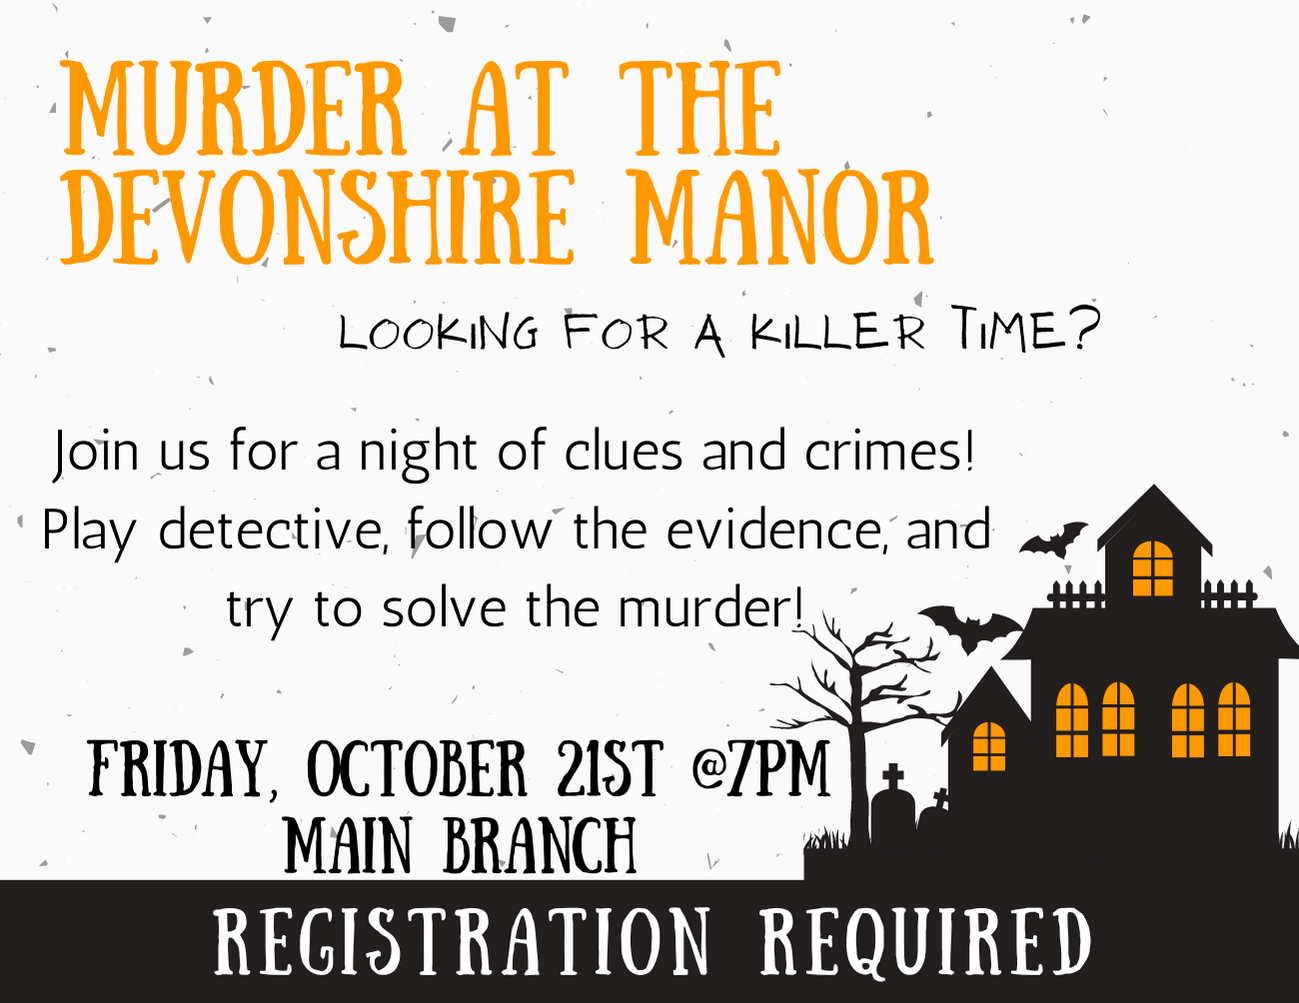 After hours murder mystery